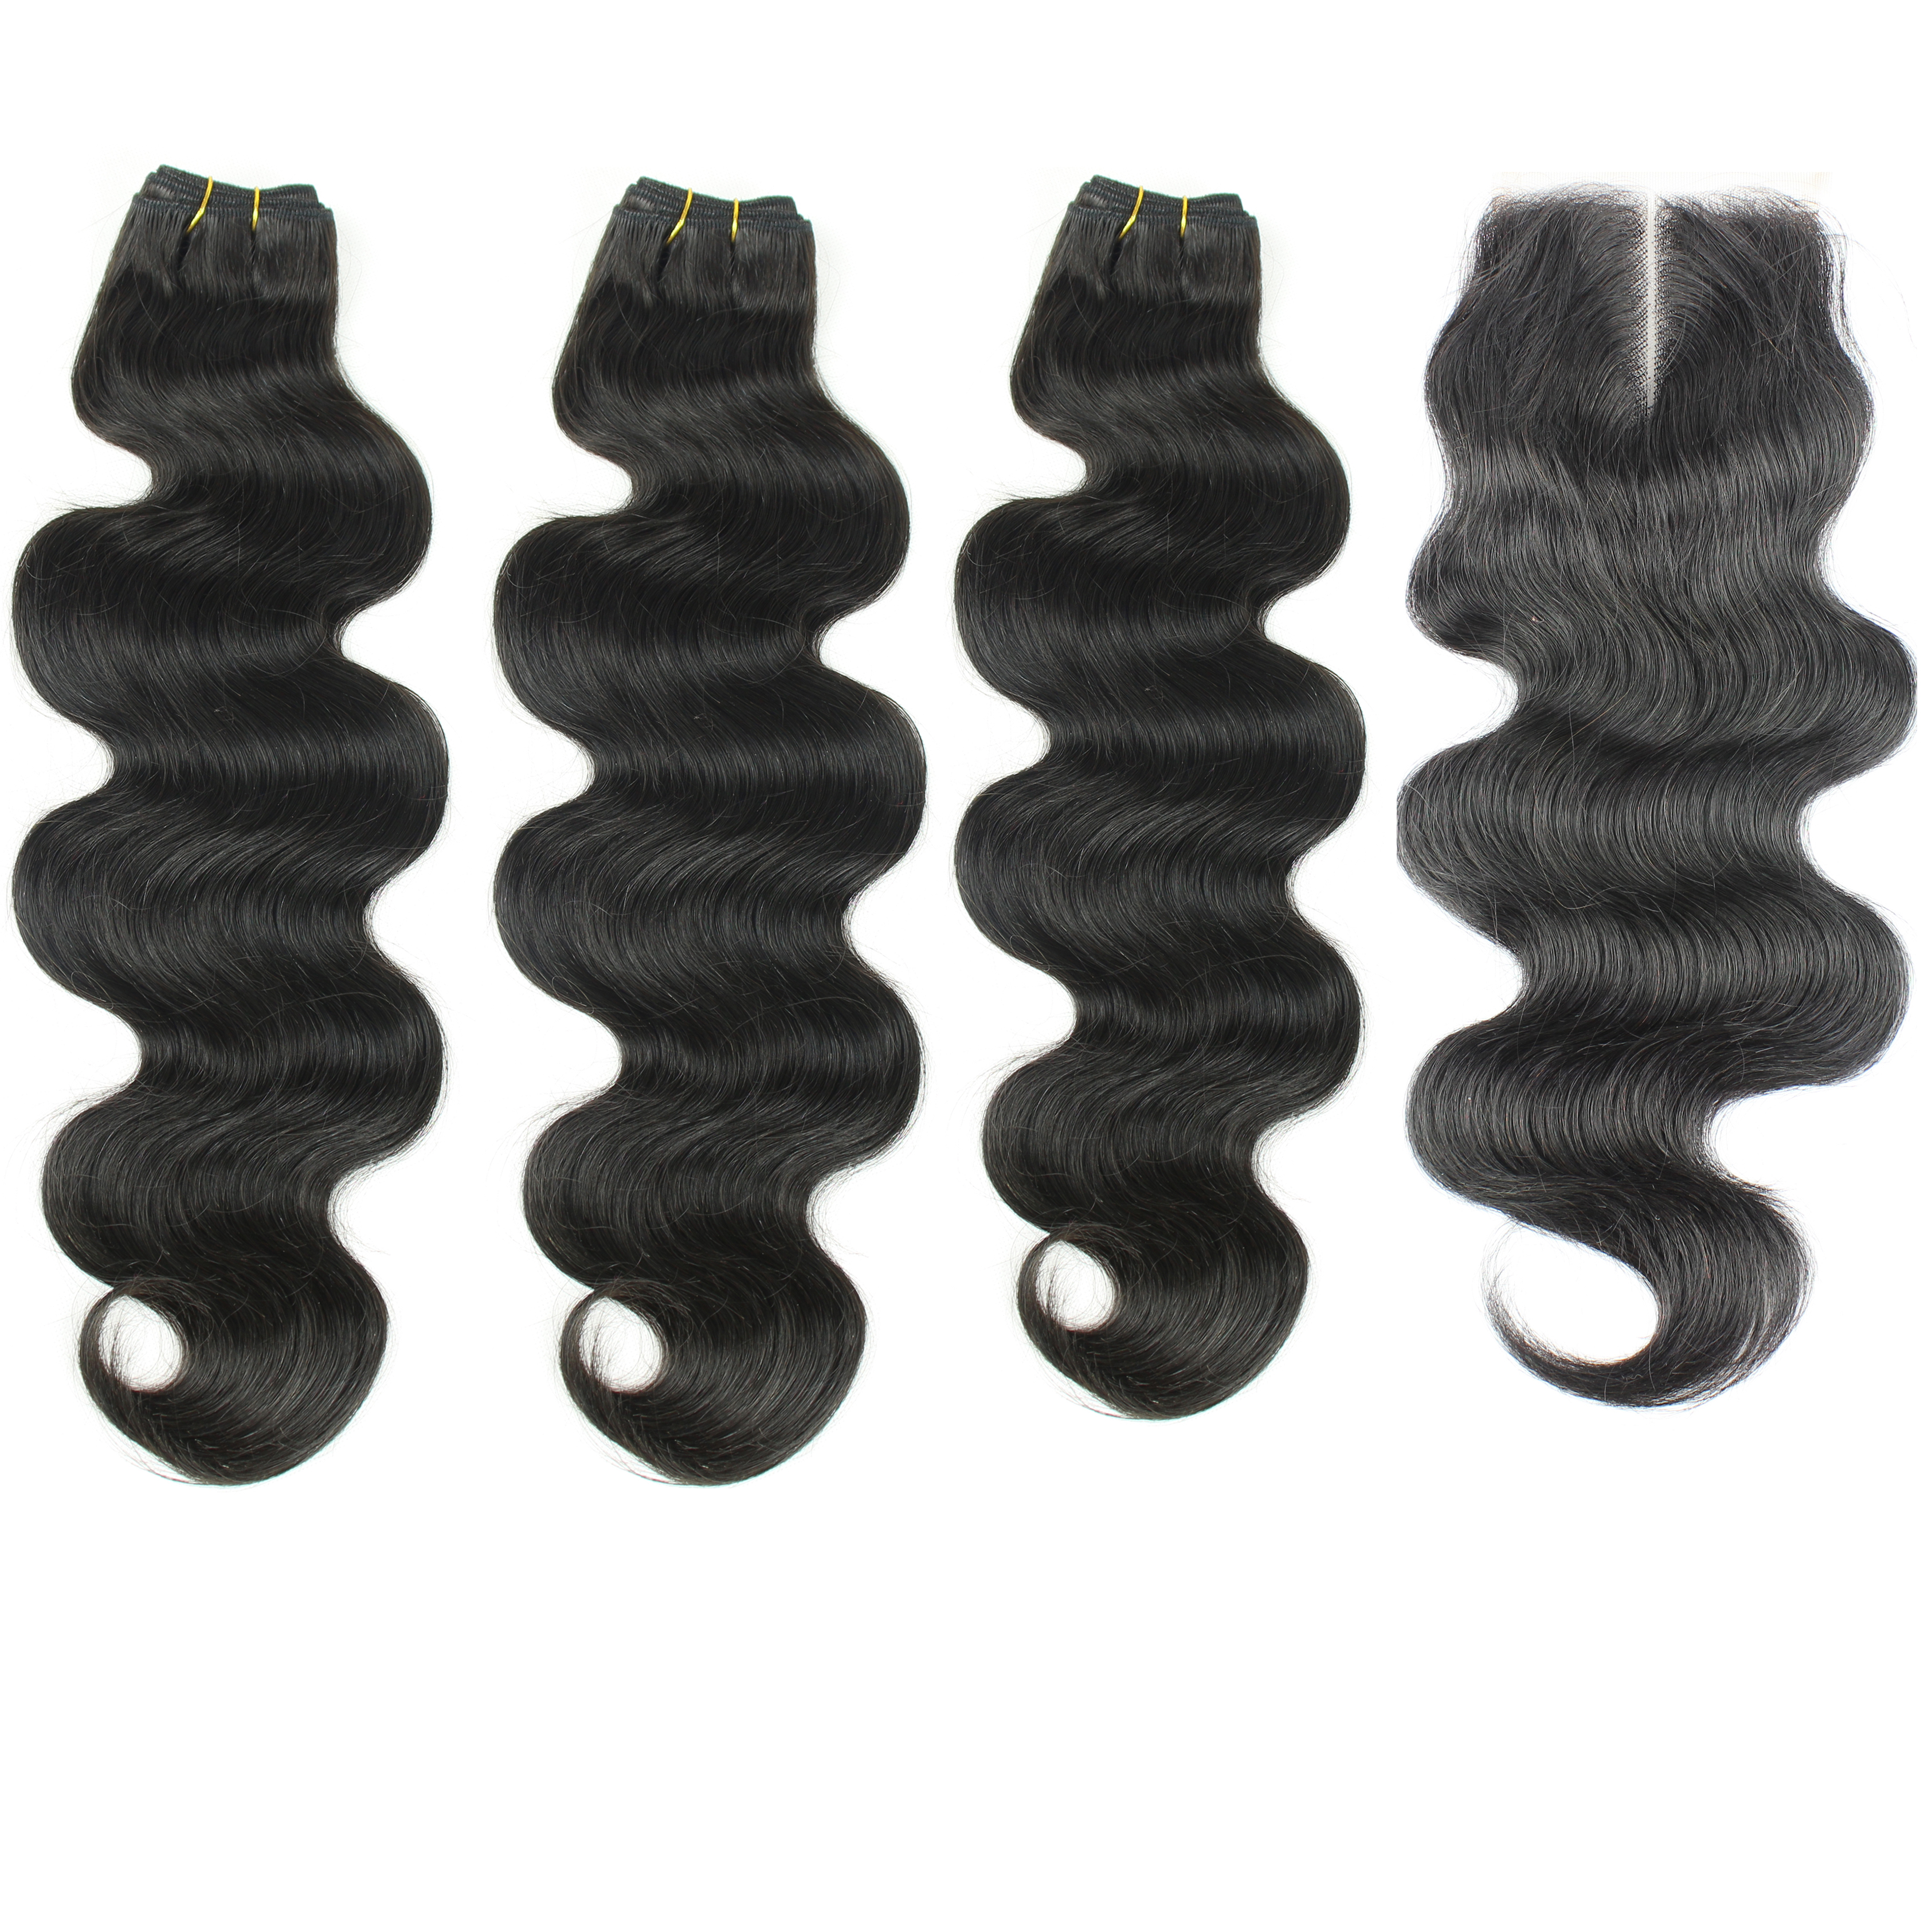 Silver Virgin Grade Human Hair Weft With 4X4 Lace Closure Peruvian Body Wave Human Hair Extensions With Closure